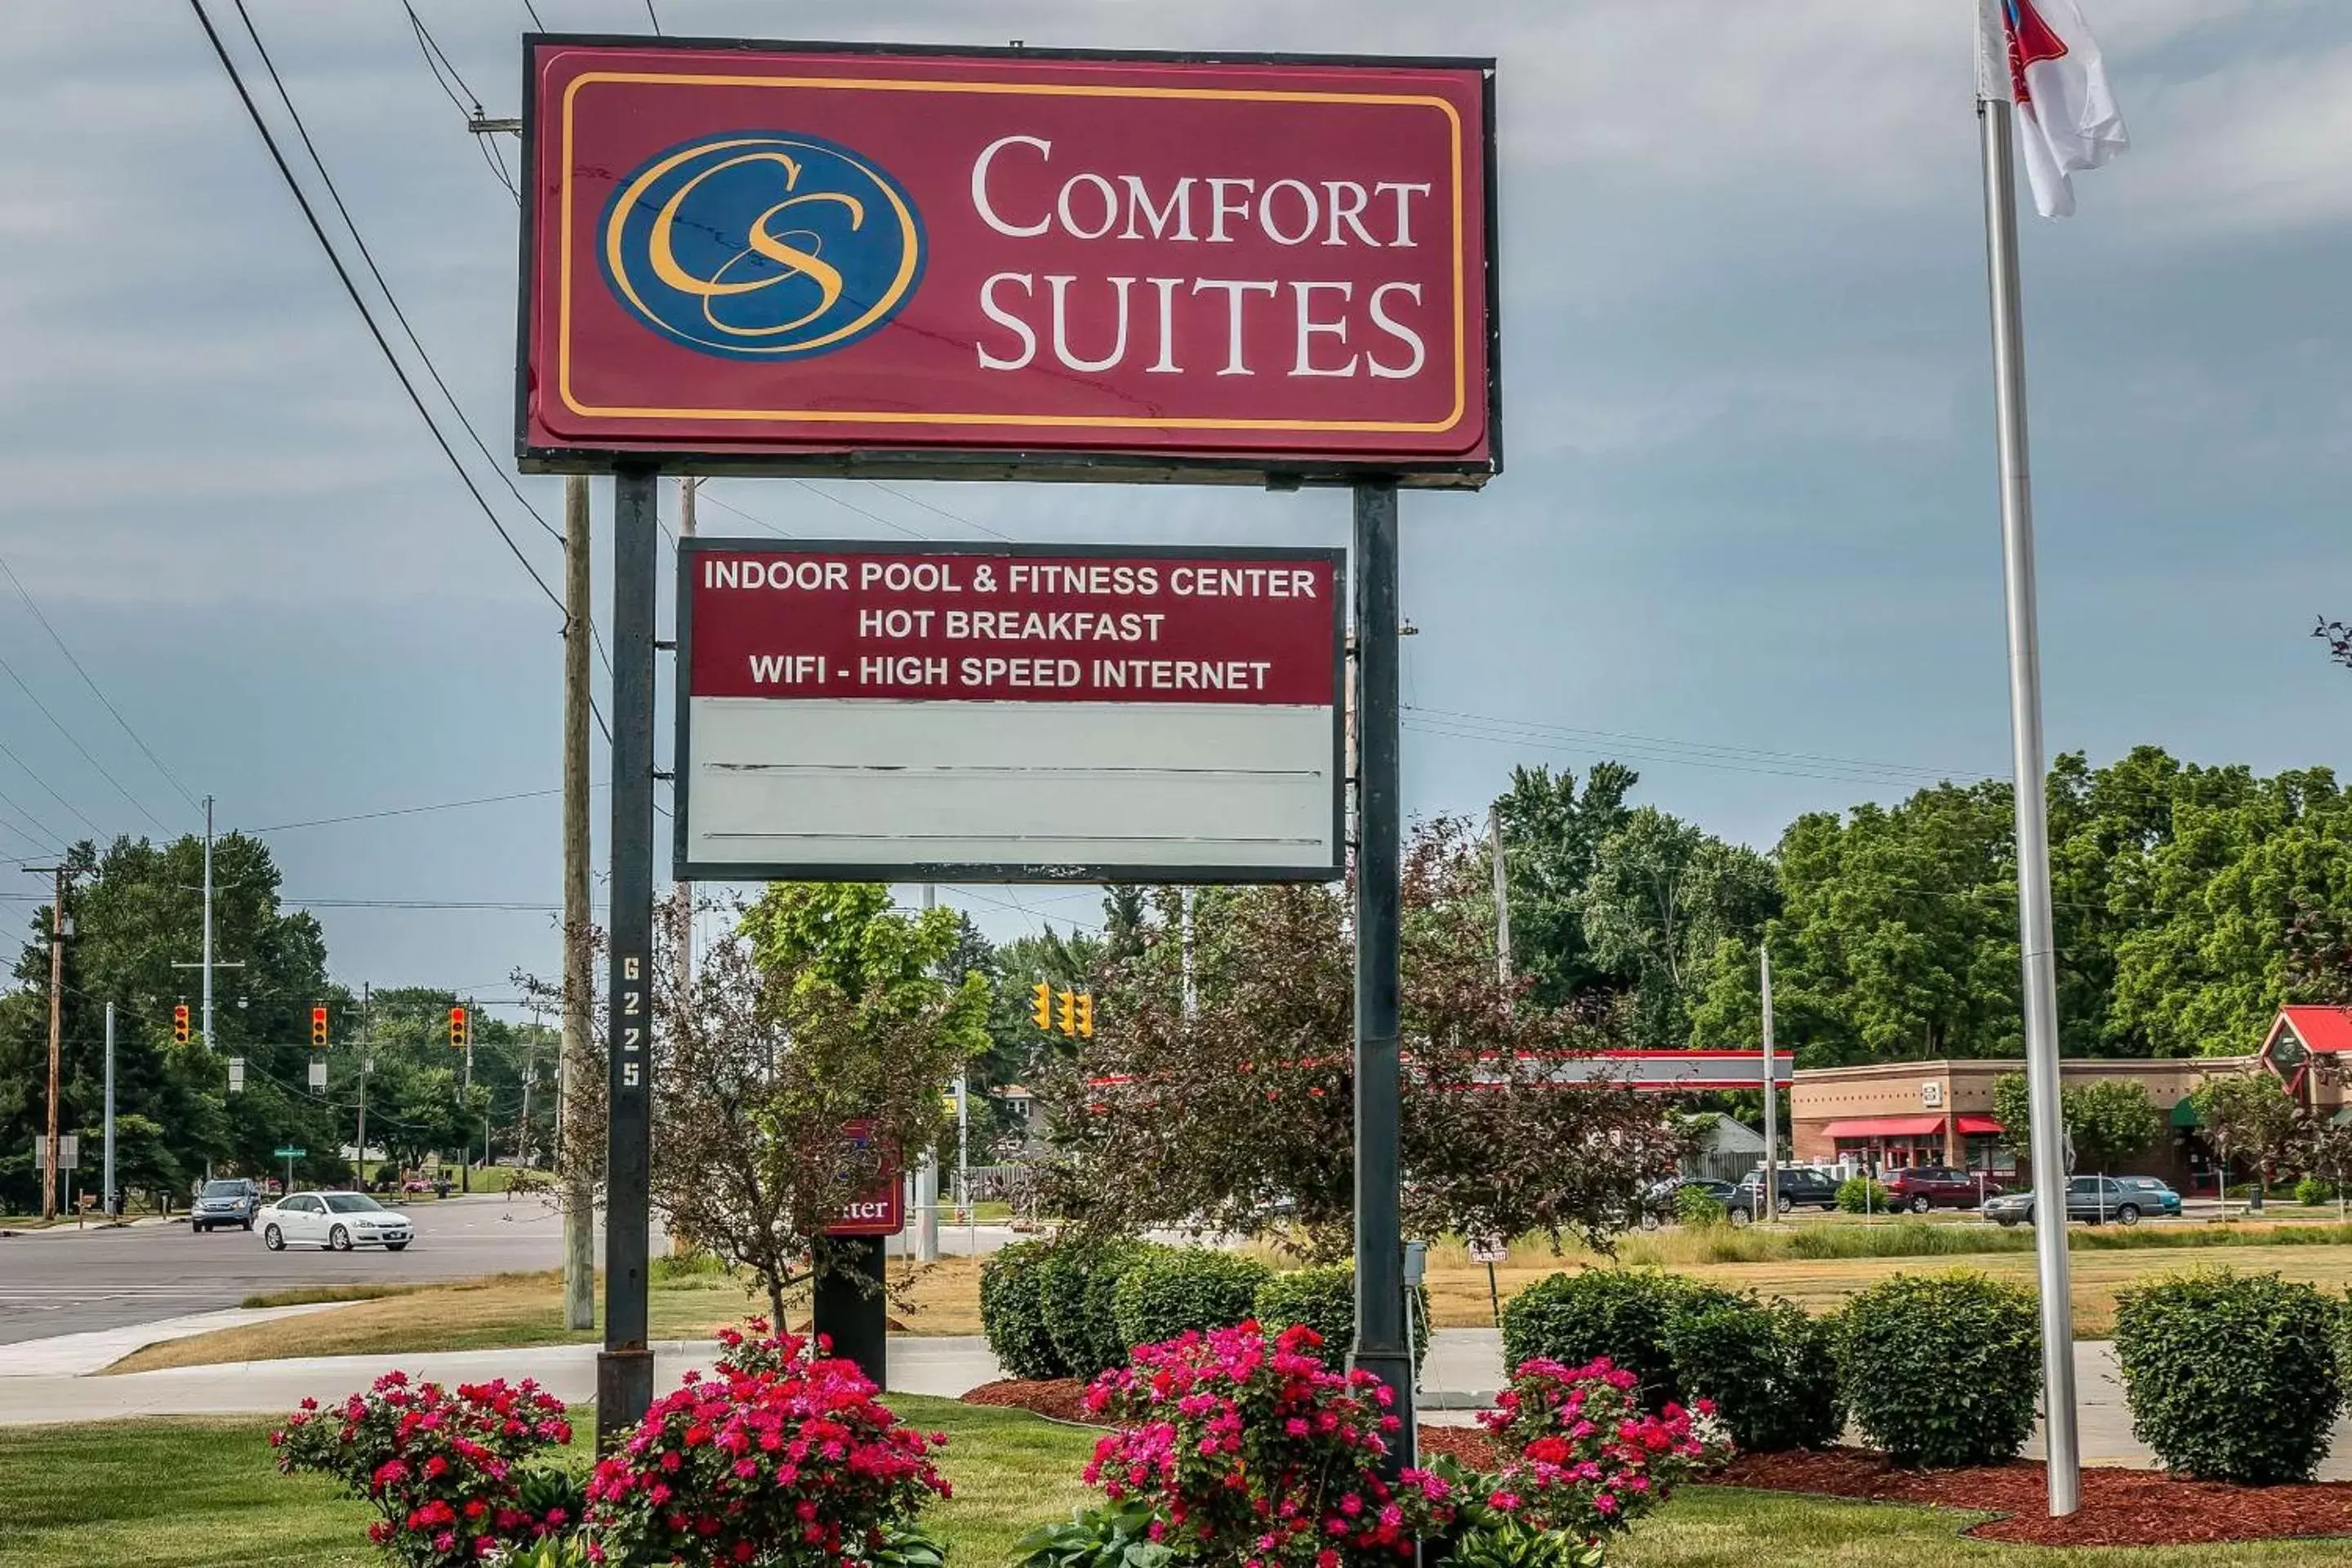 Property Building in Comfort Suites South Bend Near Casino